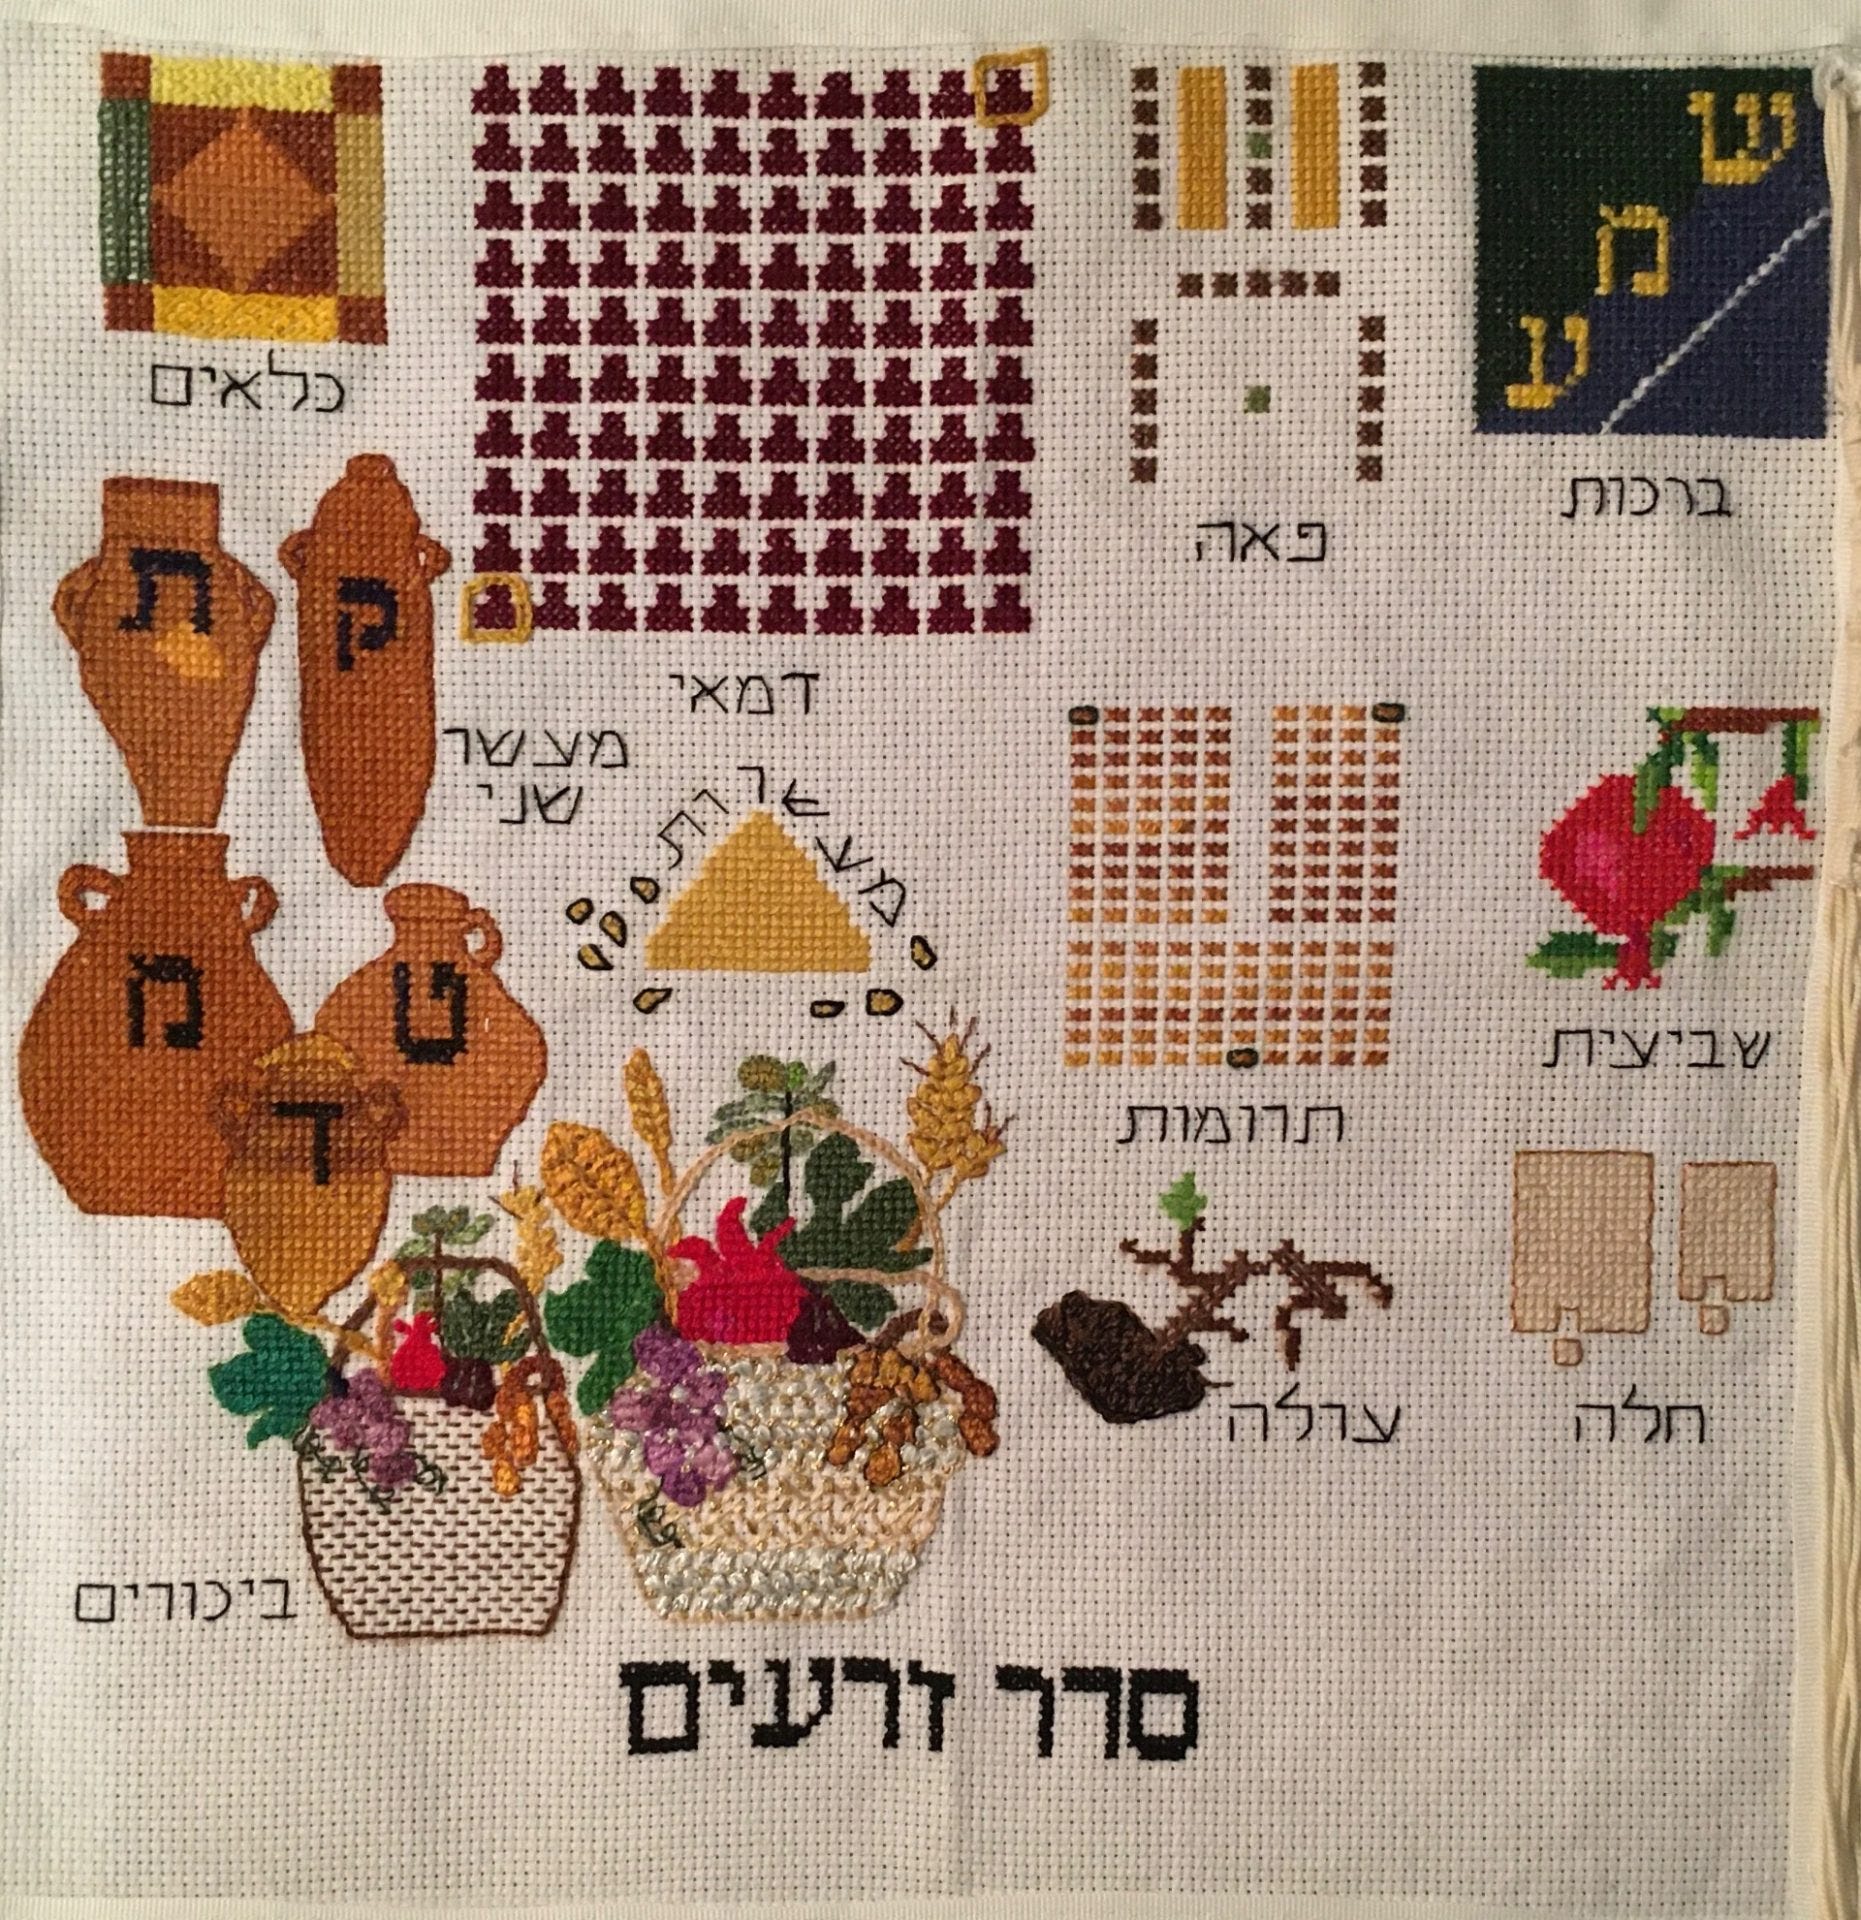 Needlework representing each of the tractates of mishna zeraim ("seeds)--prohibited mixtures, first fruit, blessings, corners, tithes, etc.